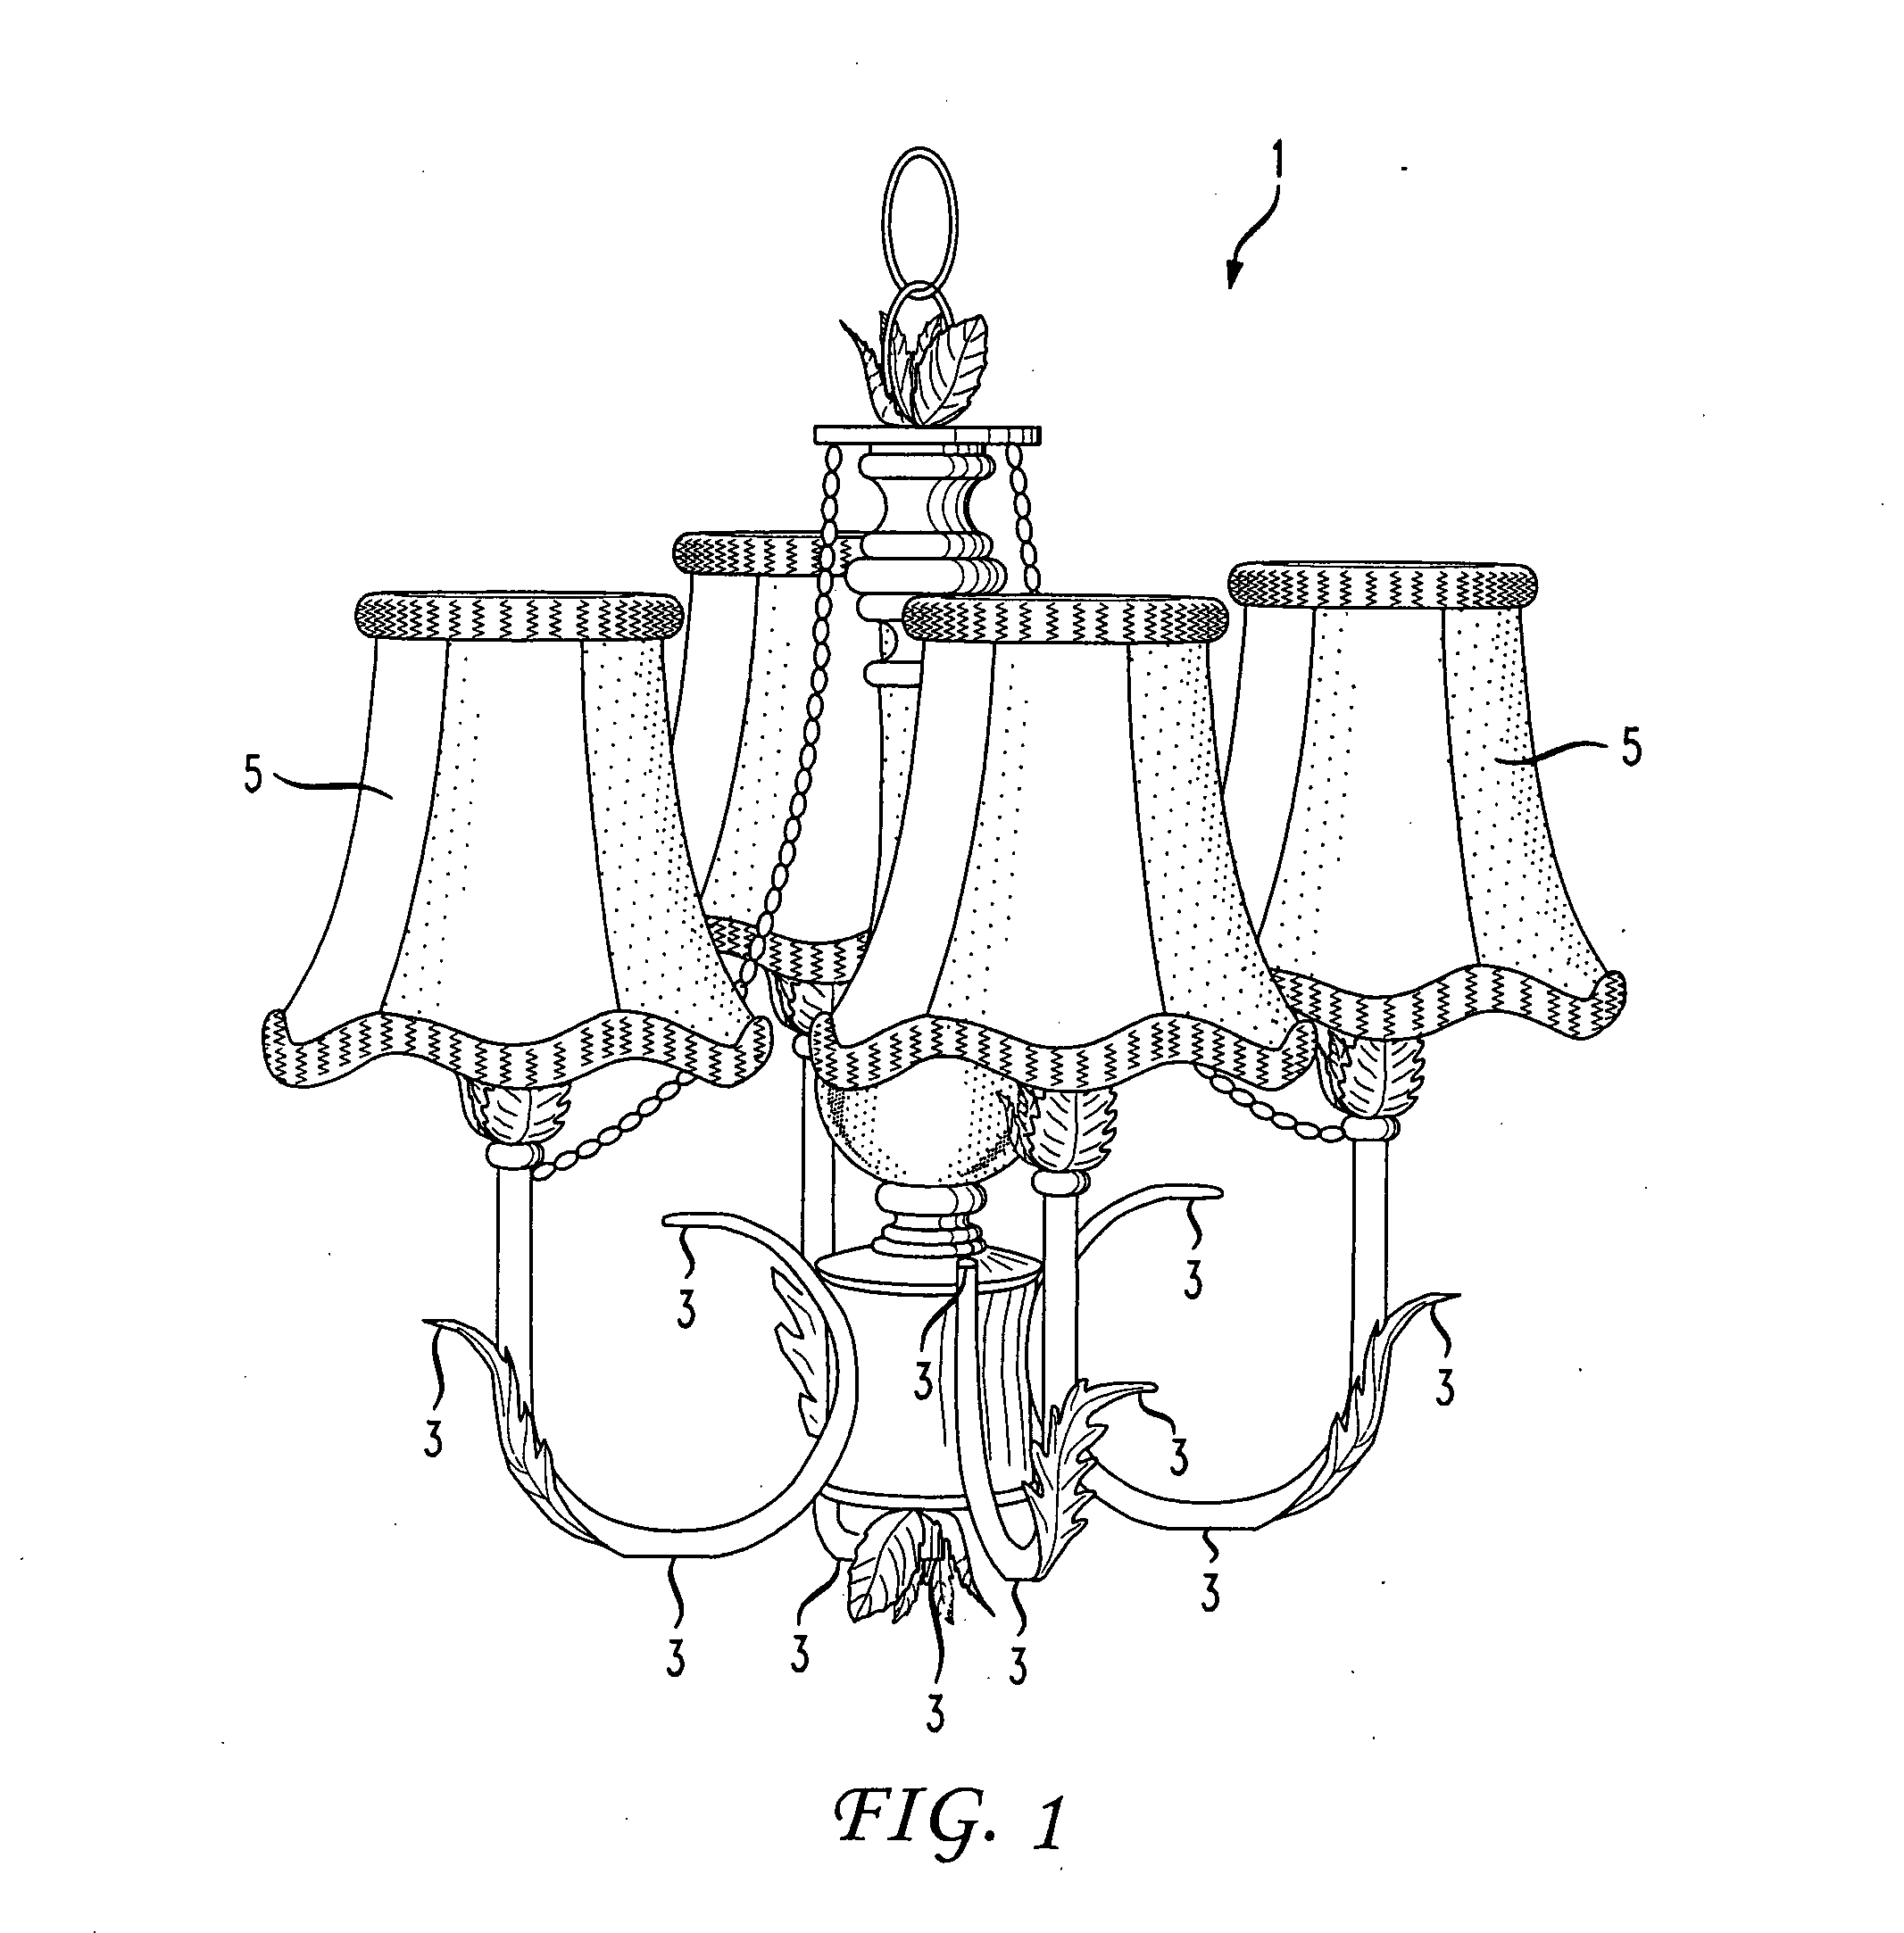 Interchangeable adornments for lighting fixtures, household apparatuses and fixtures and the like